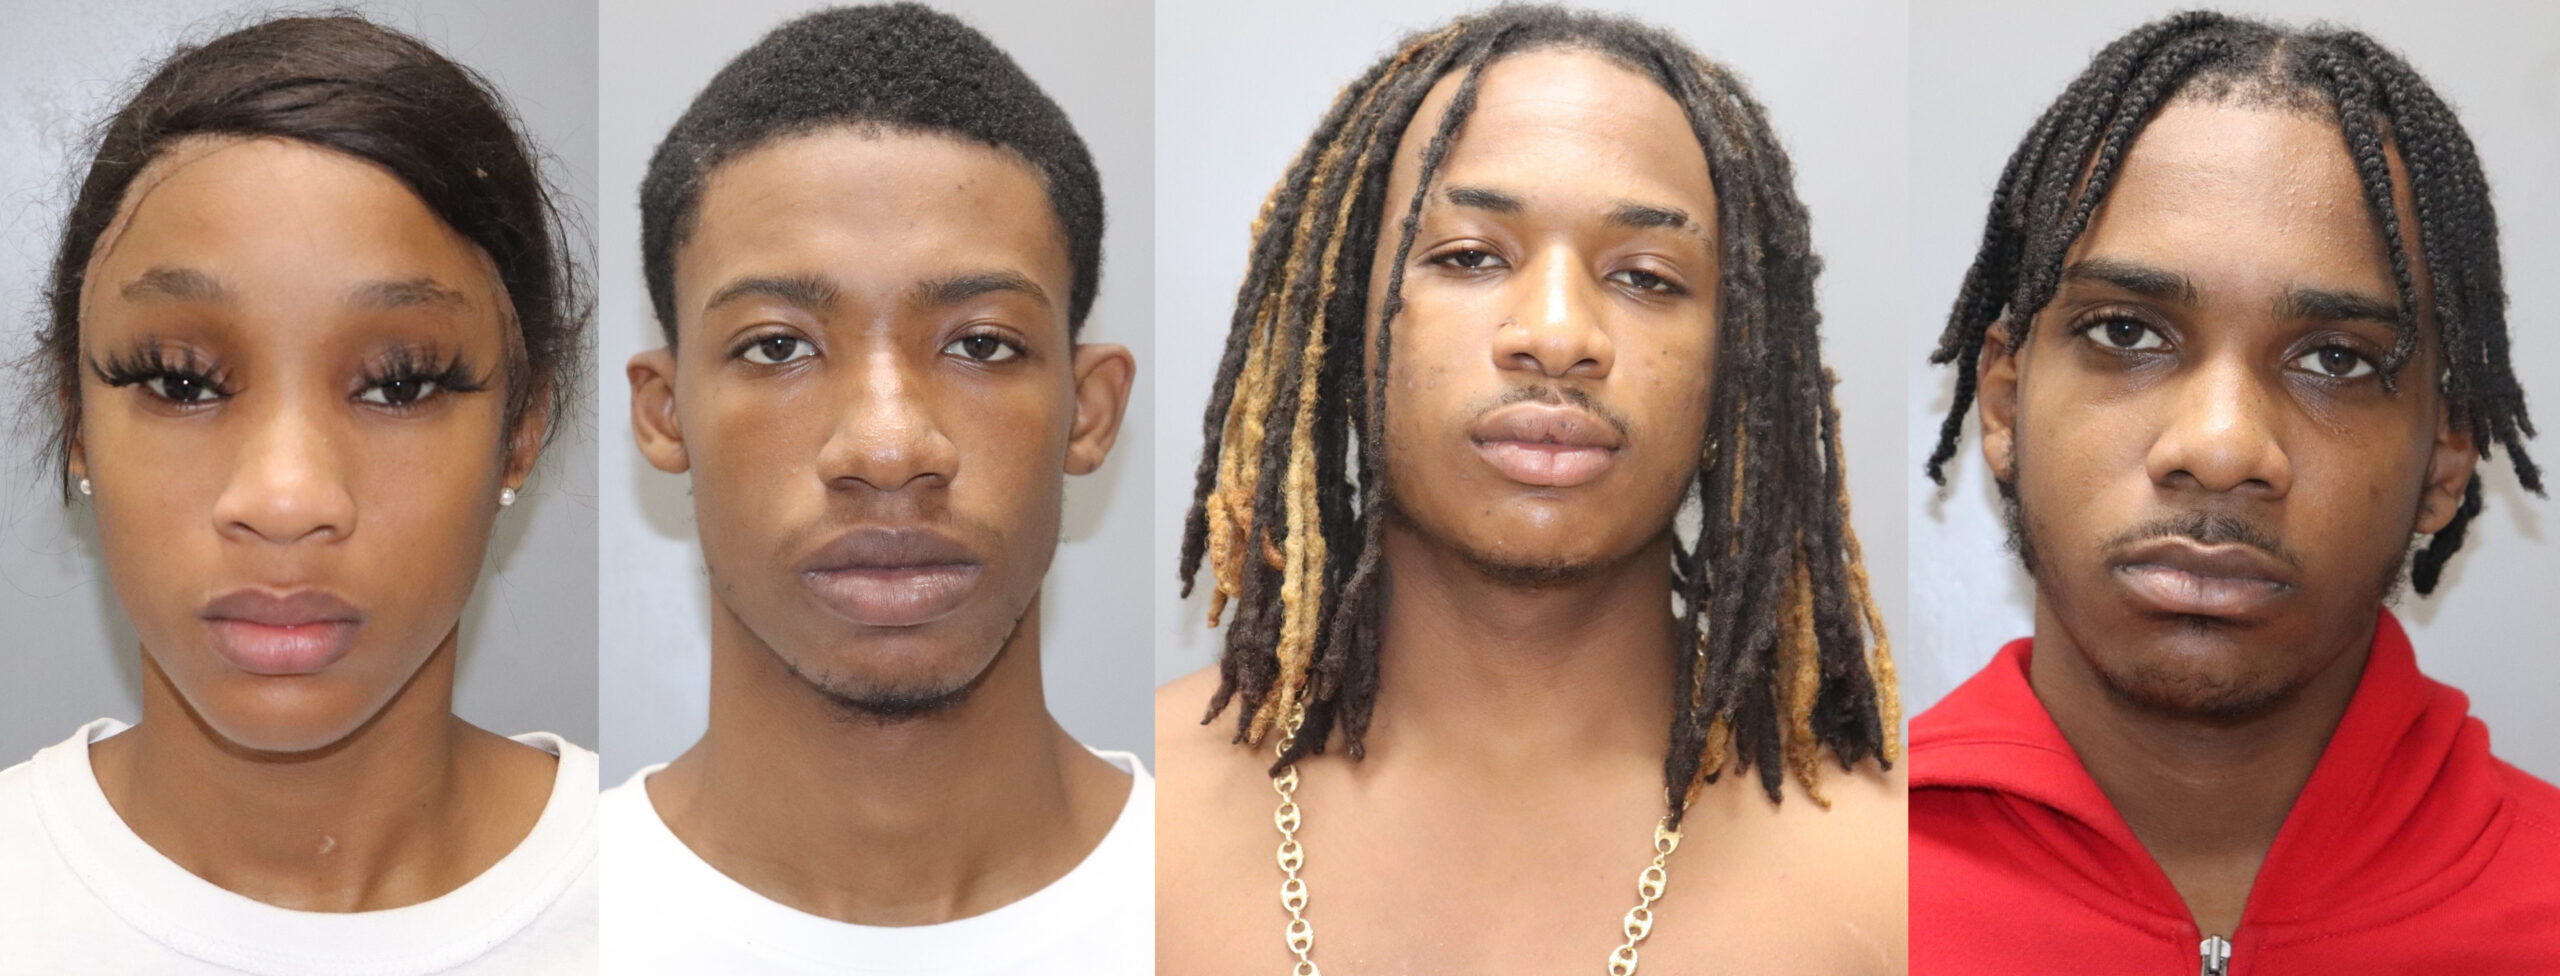 3 Men, 1 Woman Arrested In 'Bump-And-Run' Midnight Carjacking On Vets Drive